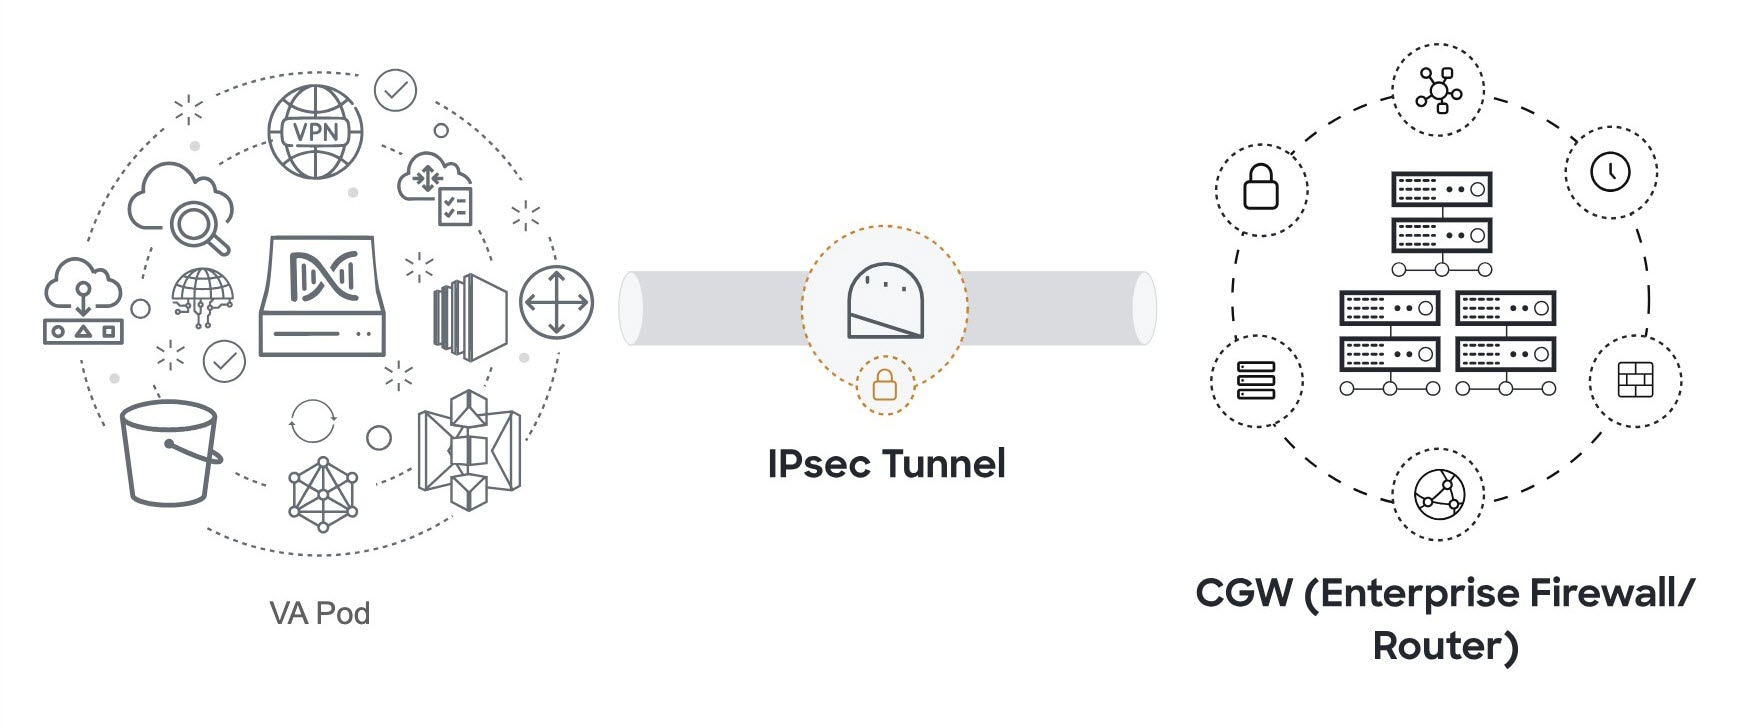 The IPsec tunnel connecting the VA pod and enterprise firewall or router is gray with a padlock, meaning it's not configured.